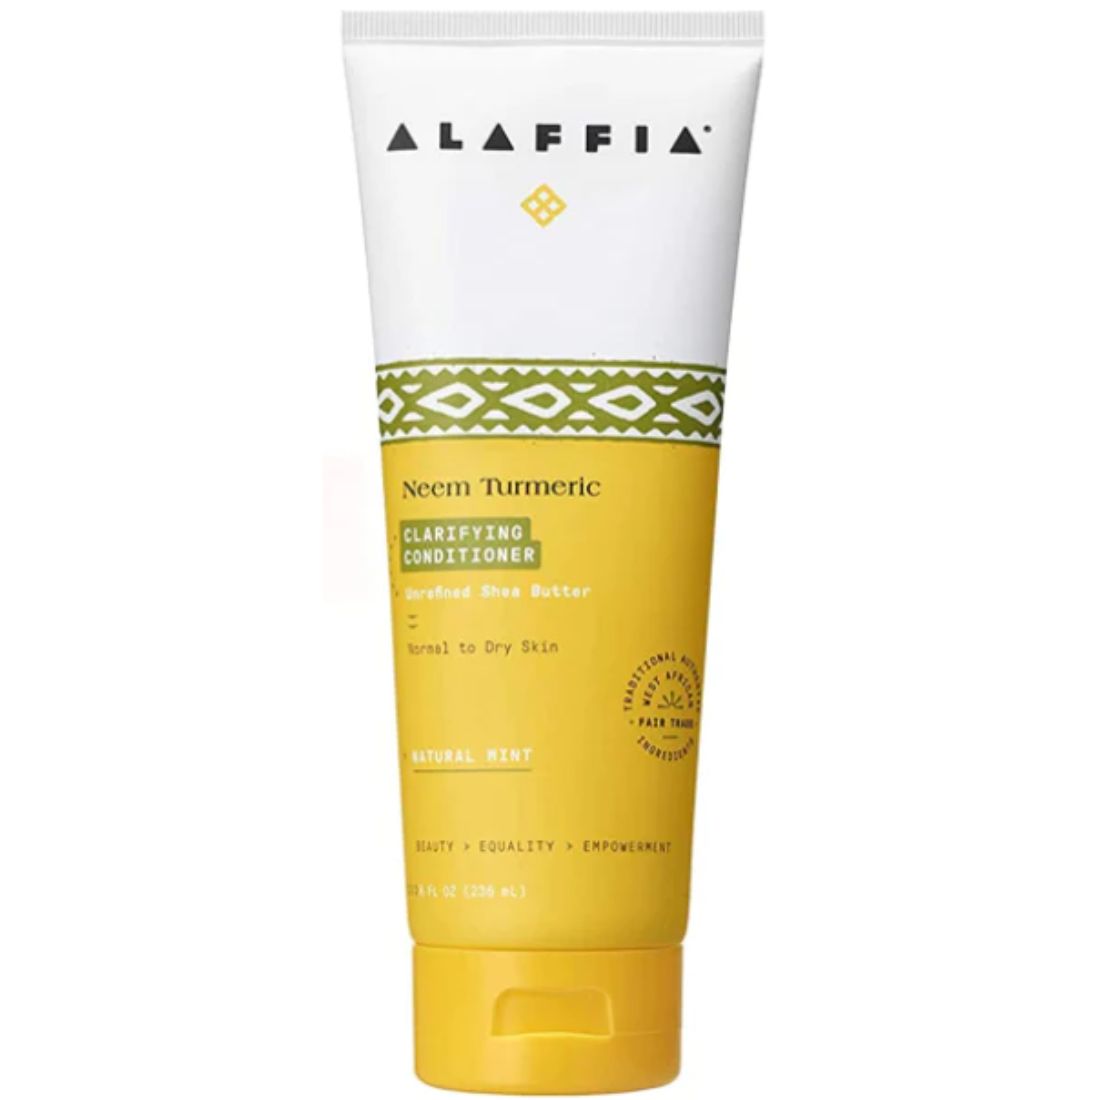 Alaffia Neem Turmeric Clarifying Conditioner, Natural Mint, Normal to dry hair, 236ml